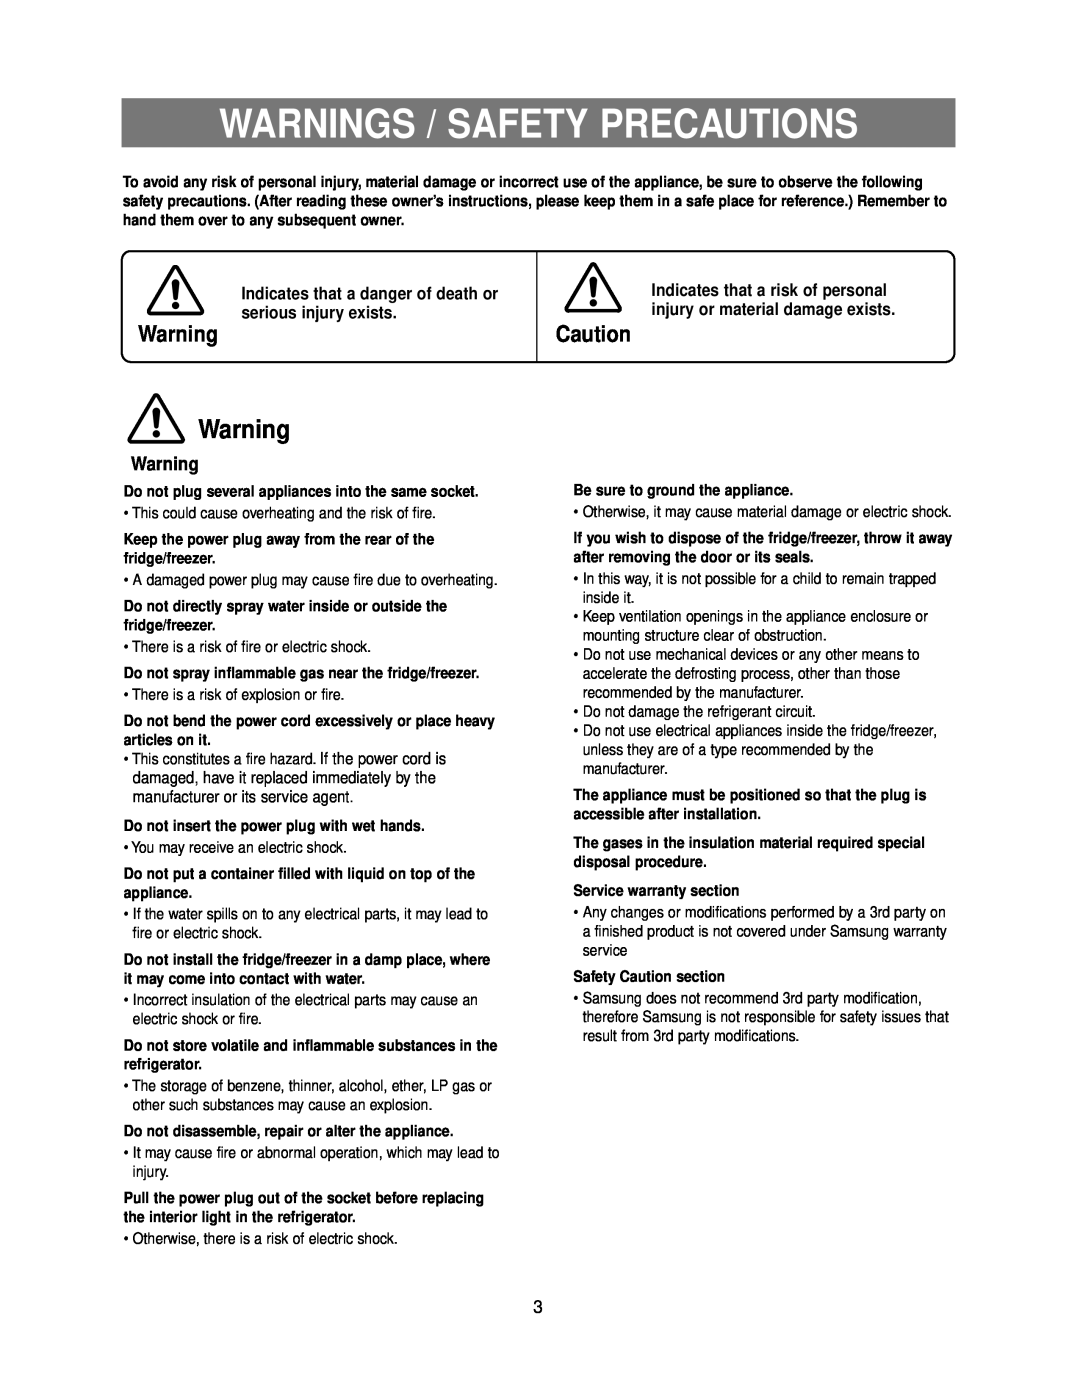 Samsung DA99-00926B owner manual Warnings / Safety Precautions, Indicates that a danger of death or serious injury exists 